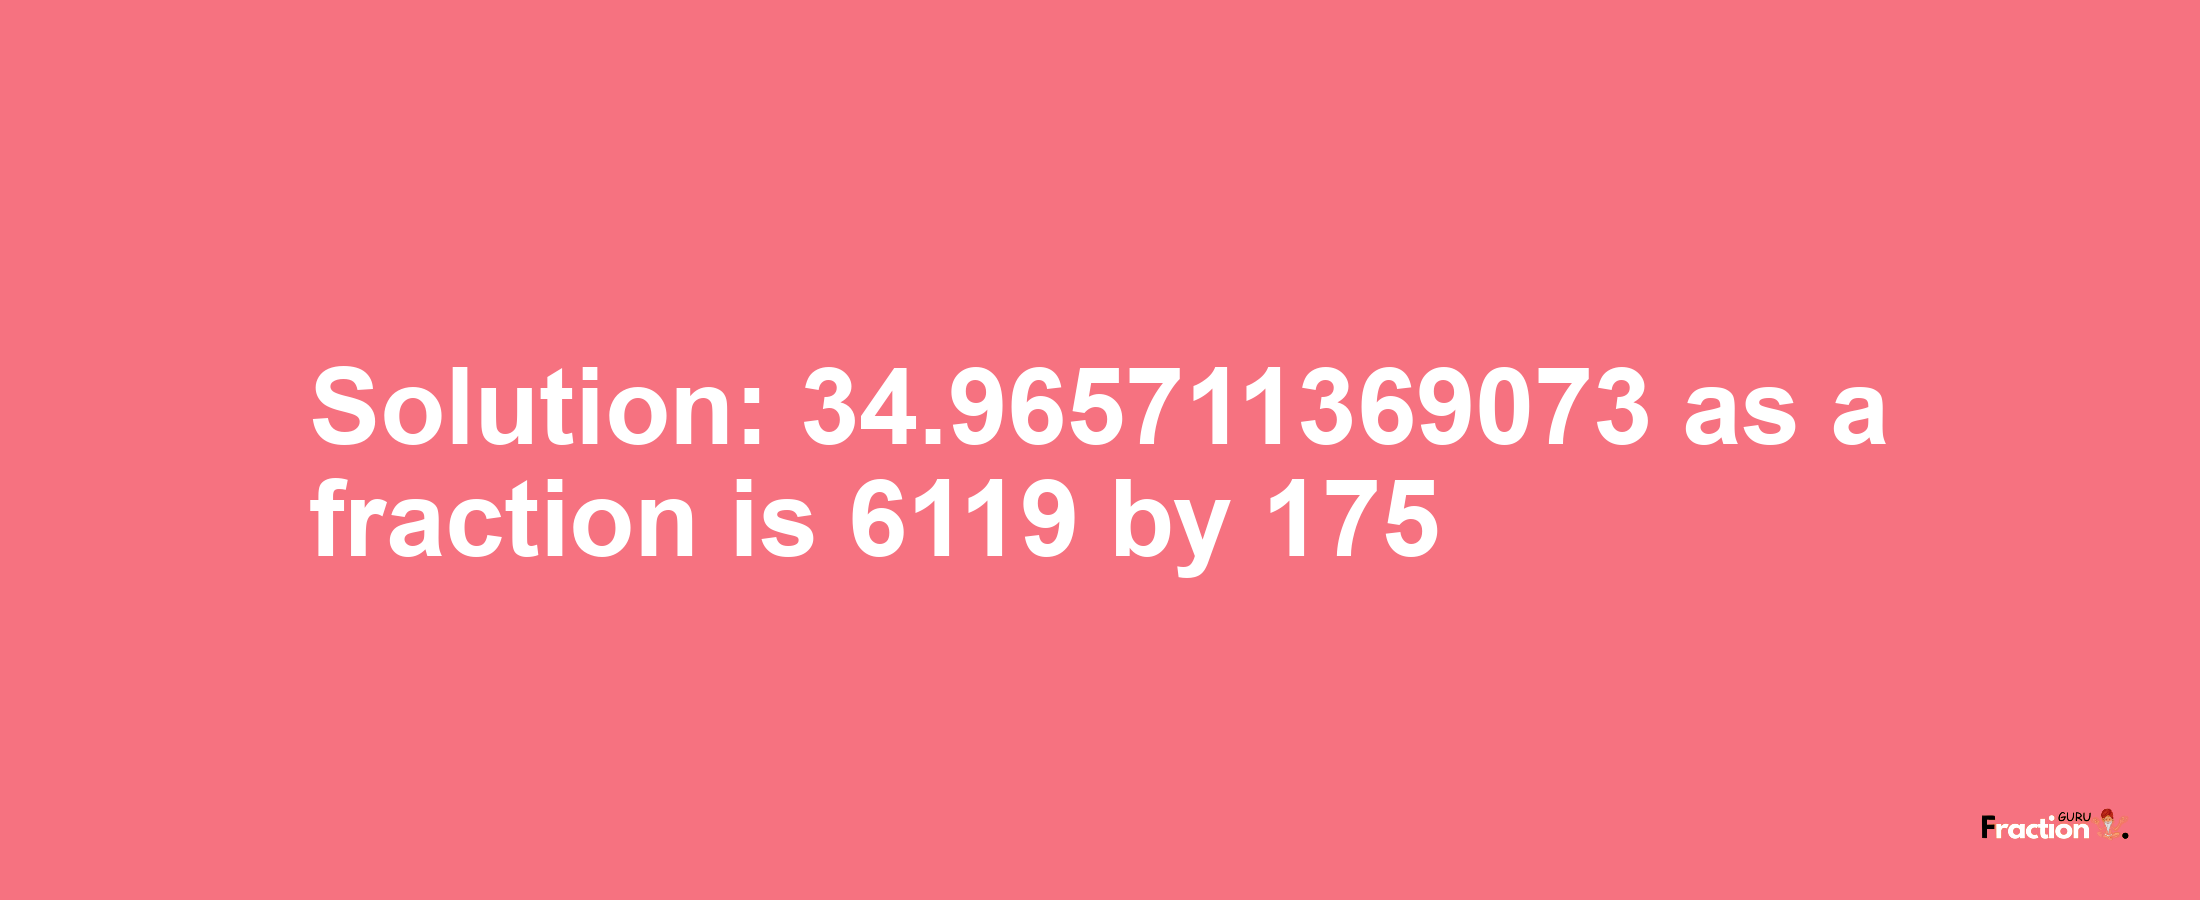 Solution:34.965711369073 as a fraction is 6119/175